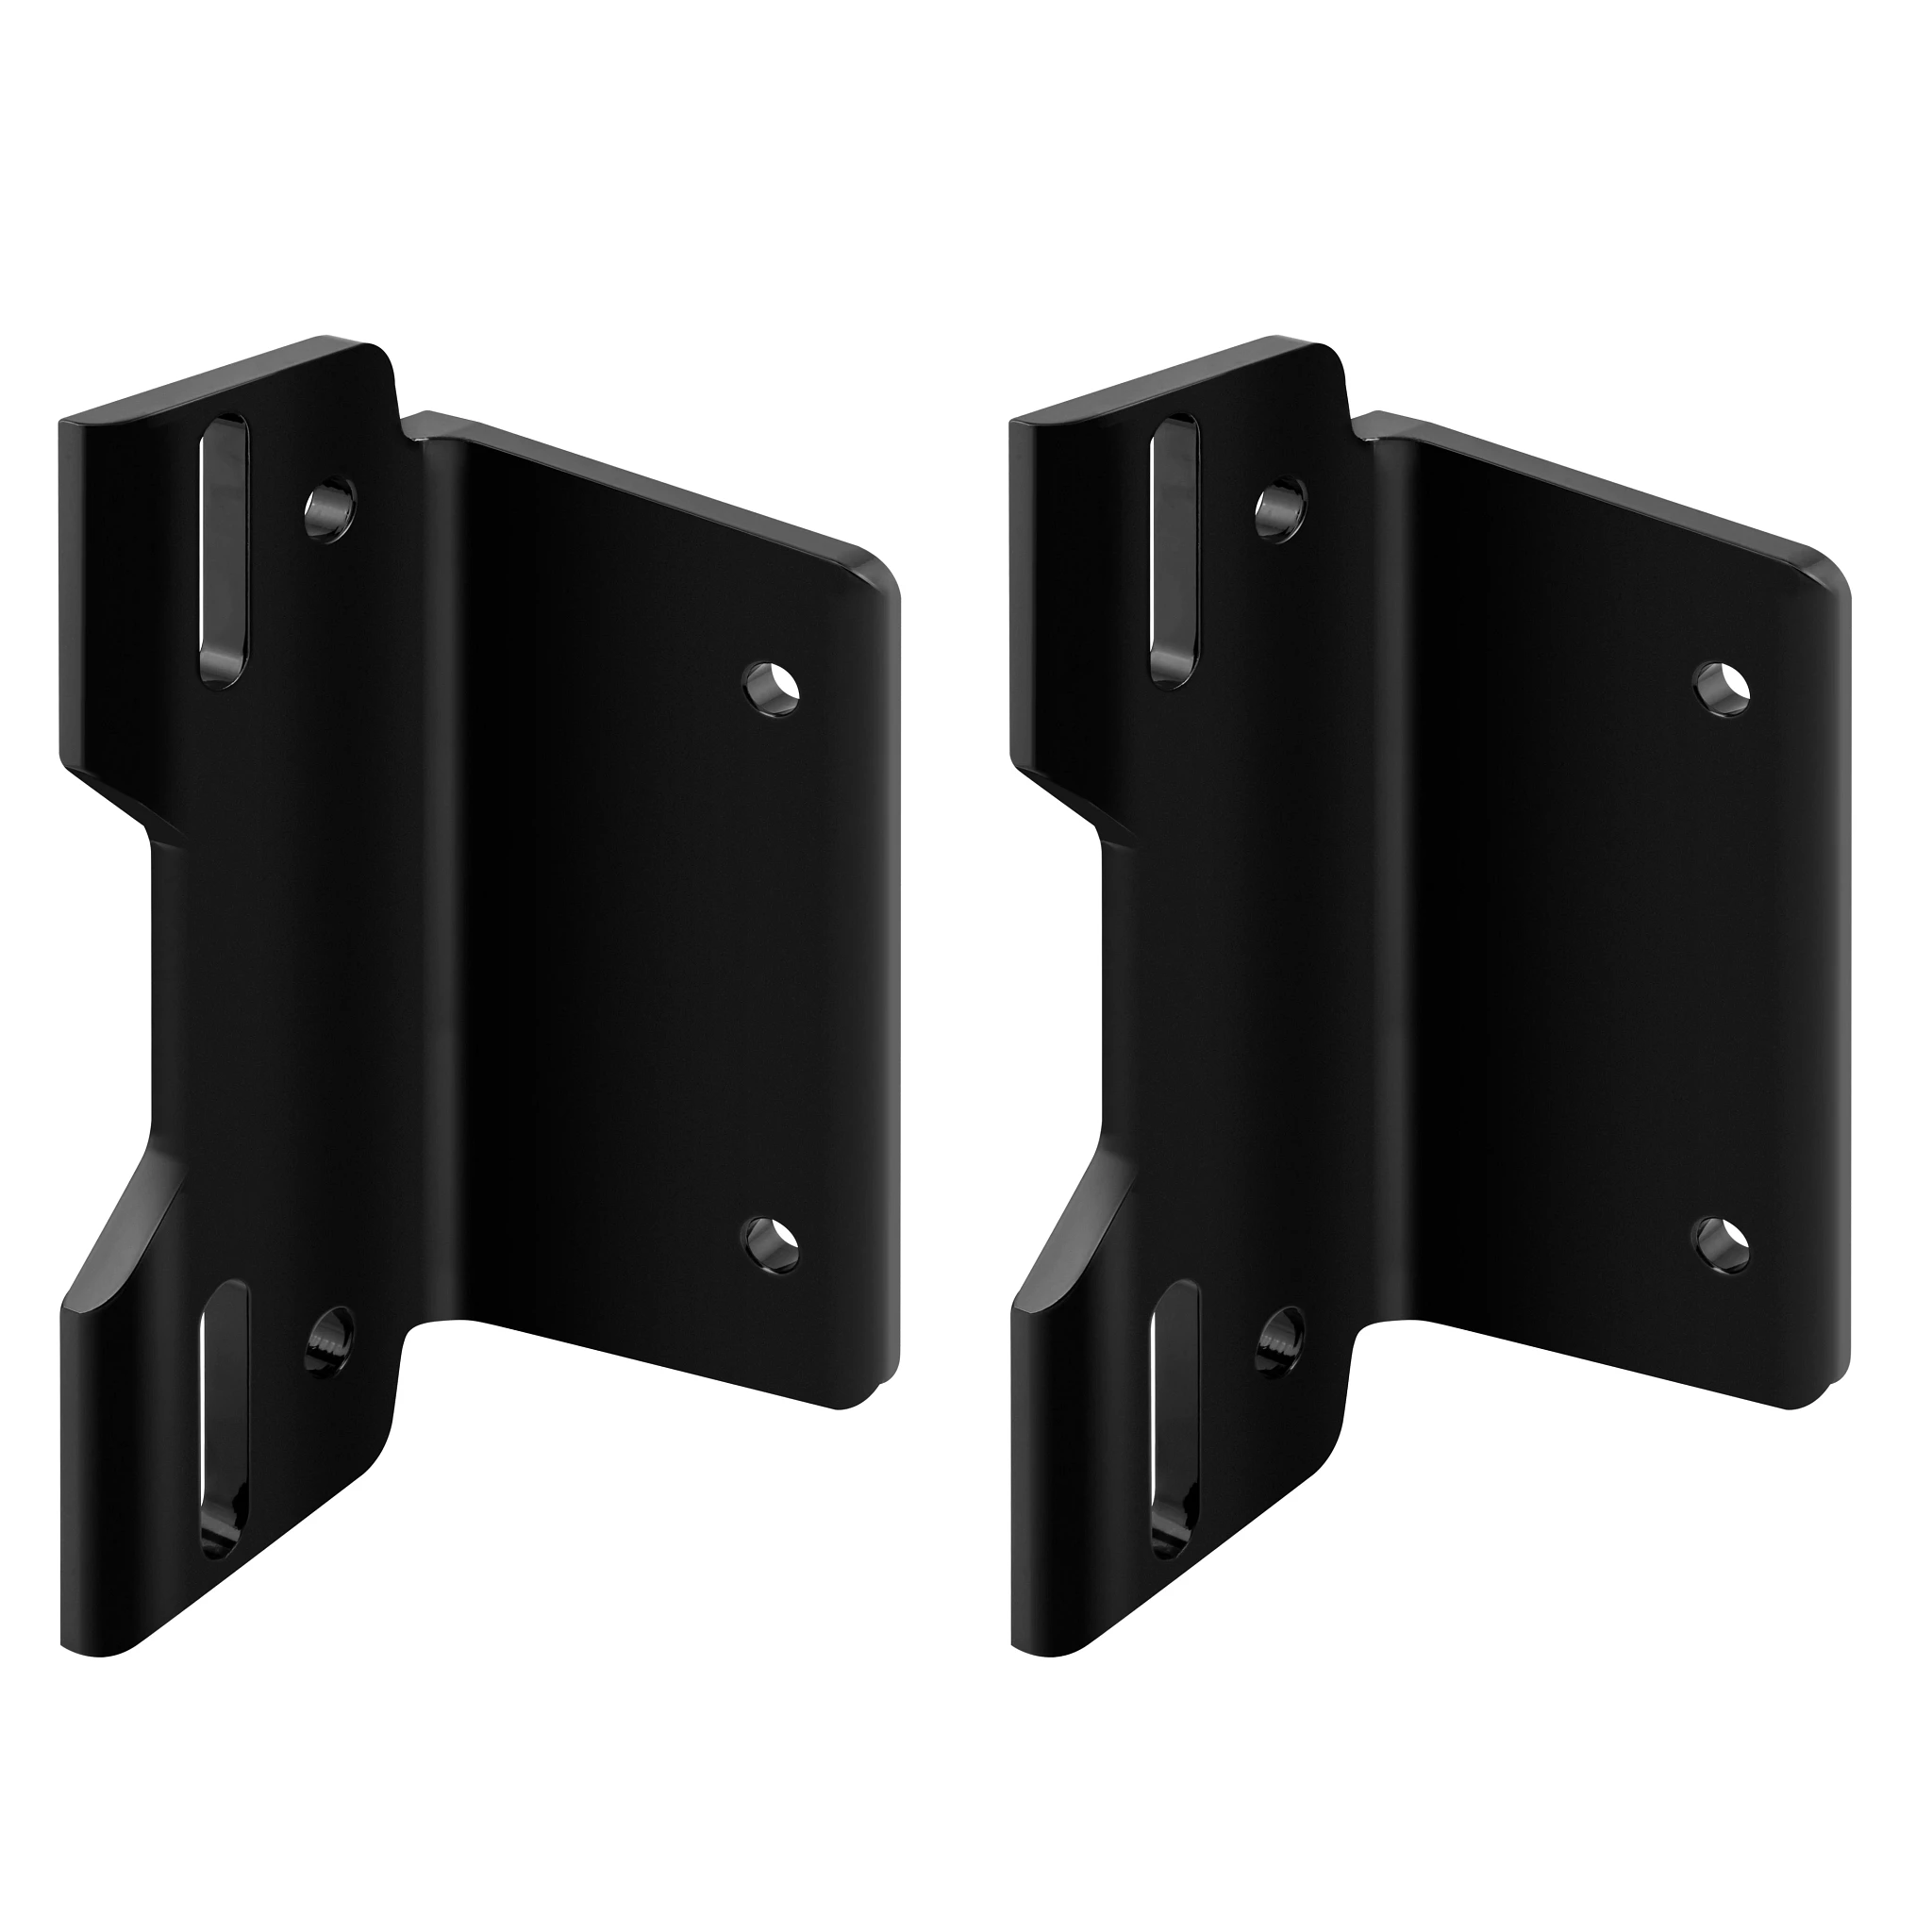 Angled view of black, 2-piece sandwich bracket for Raptor shallow water anchor